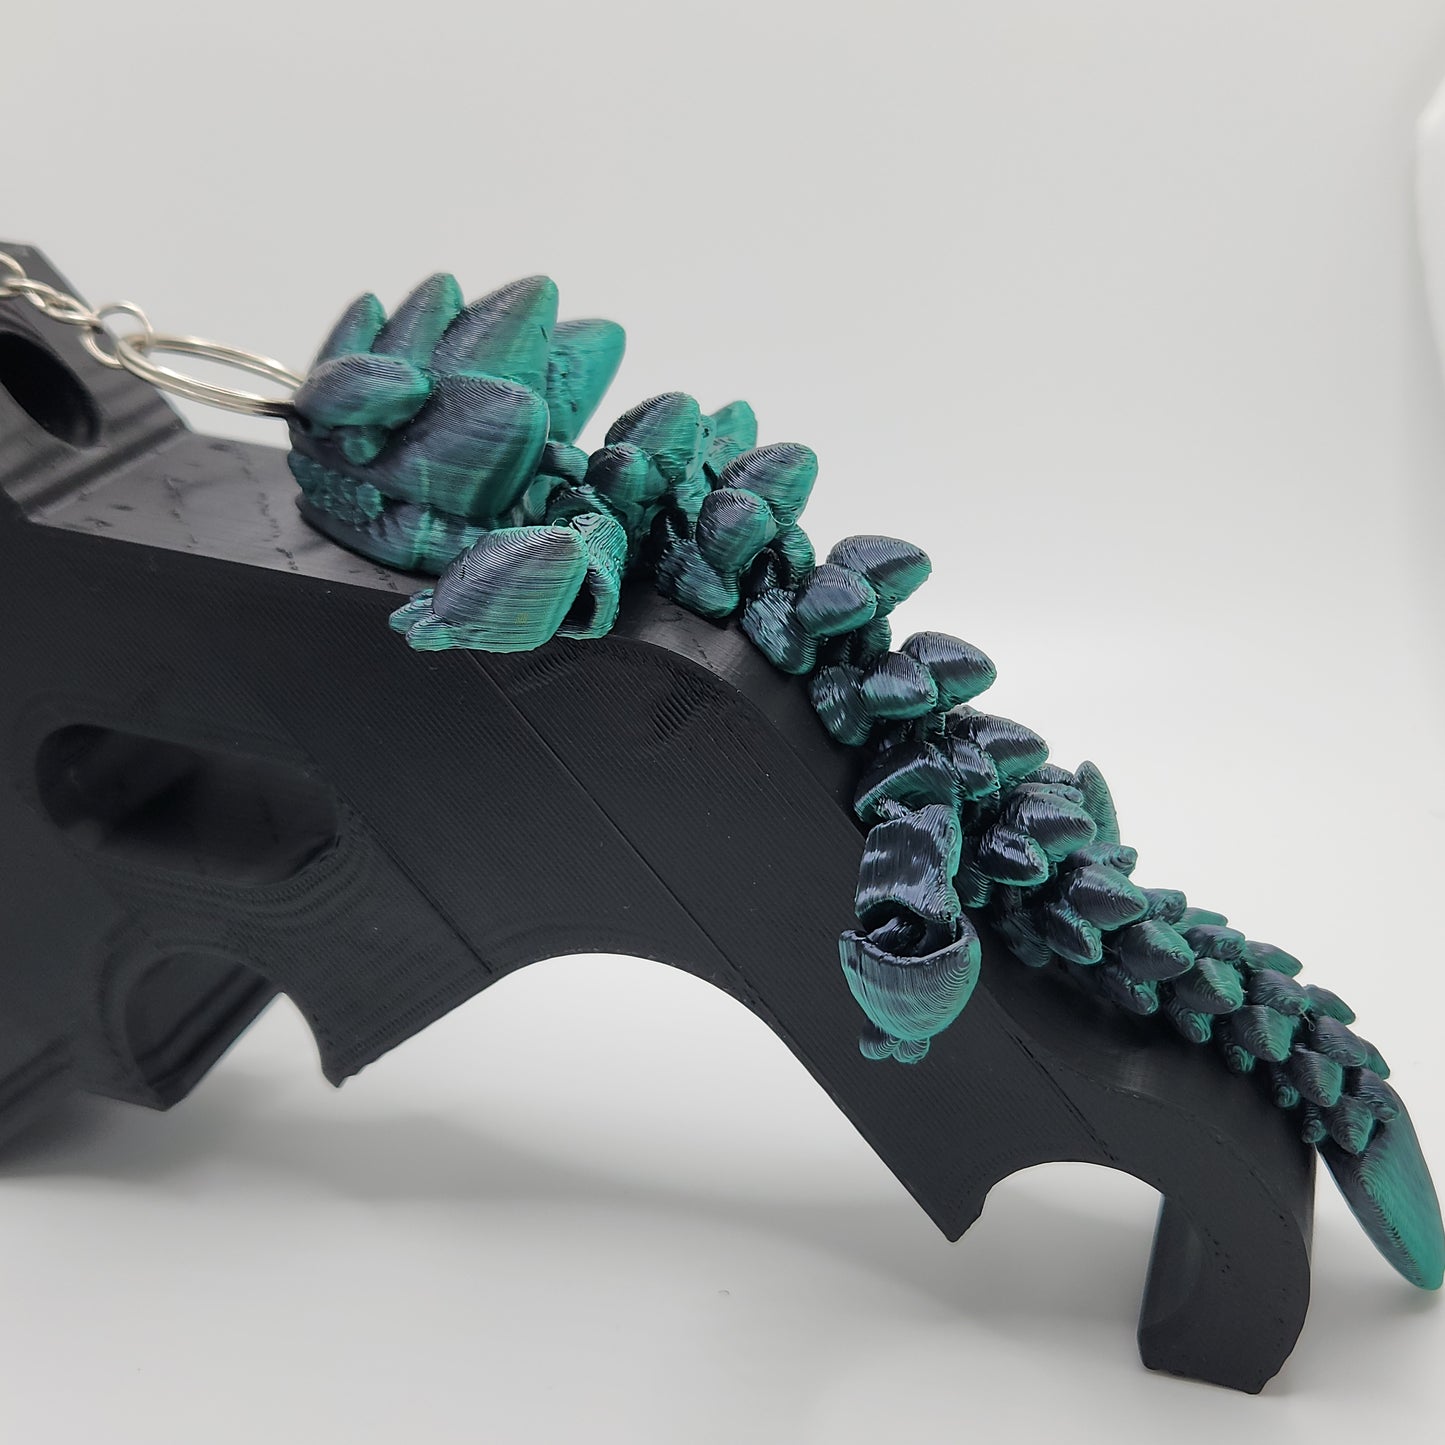 A 3D printed articulated dragon keychain in black and teal, shown climbing a black object with intricate scale details.